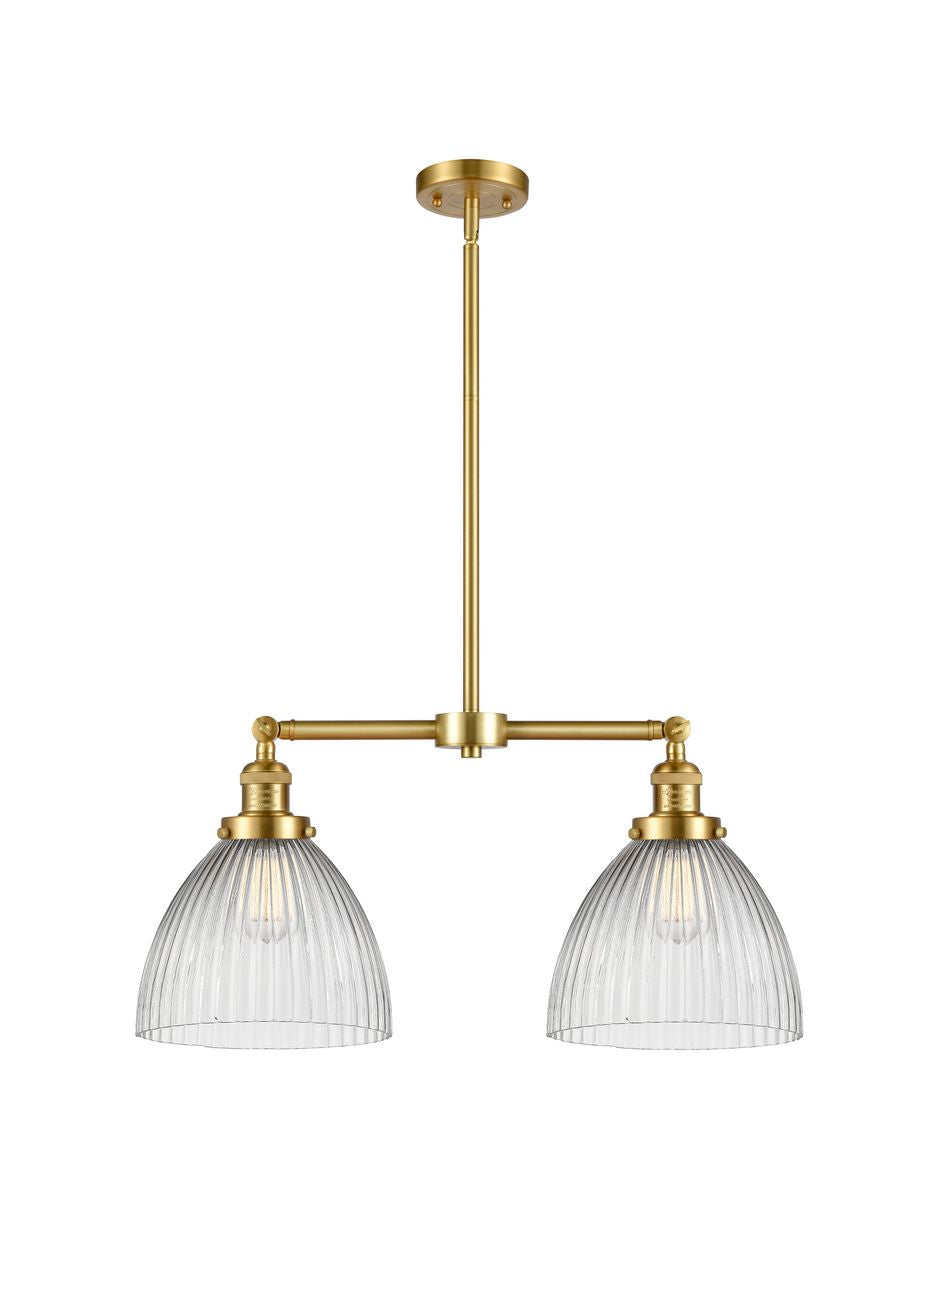 209-SG-G222 2-Light 21" Satin Gold Island Light - Clear Halophane Seneca Falls Glass - LED Bulb - Dimmensions: 21 x 5 x 10<br>Minimum Height : 23.125<br>Maximum Height : 47.125 - Sloped Ceiling Compatible: Yes